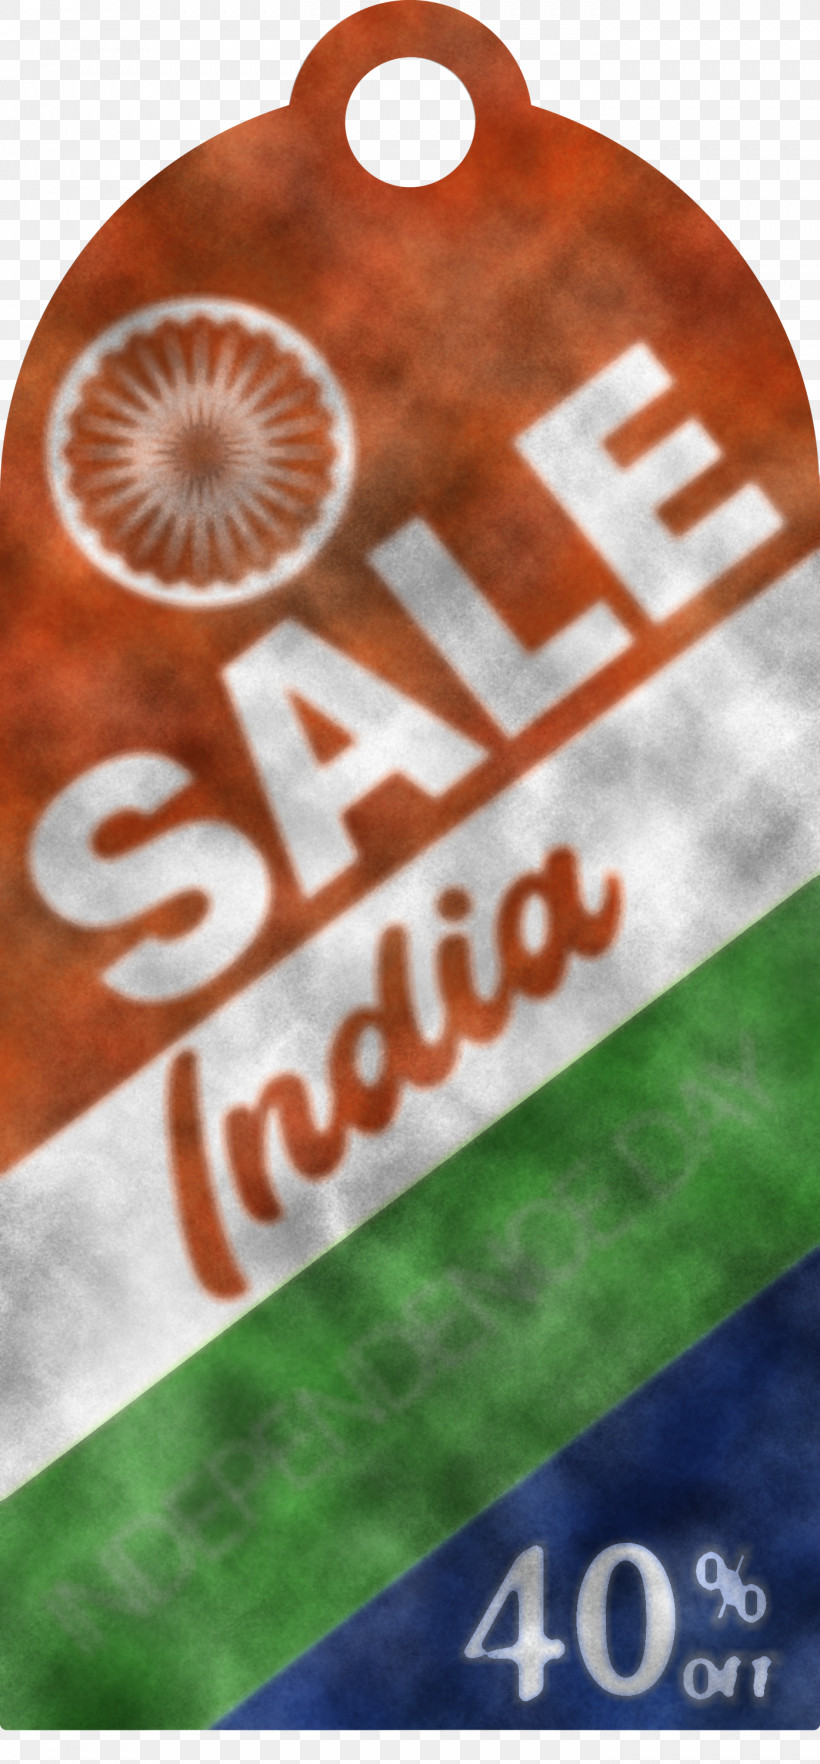 India Indenpendence Day Sale Tag India Indenpendence Day Sale Label, PNG, 1394x2999px, India Indenpendence Day Sale Tag, India Indenpendence Day Sale Label, Meter Download Free